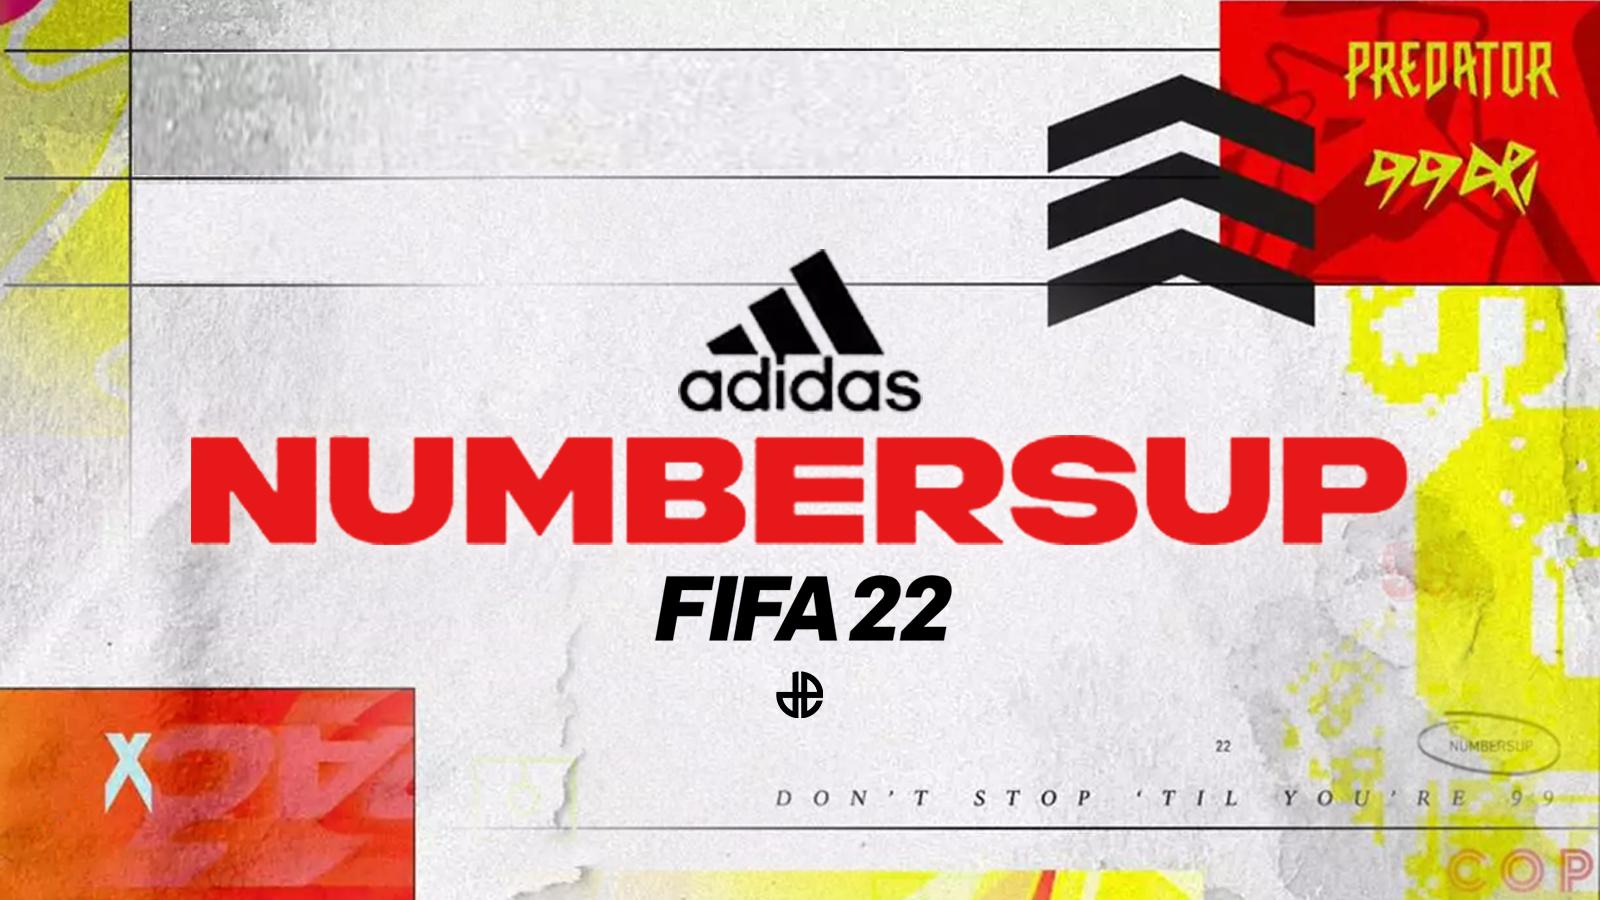 FIFA Numbers Up promo: Adidas start date, confirmed FUT players & how it works - Dexerto